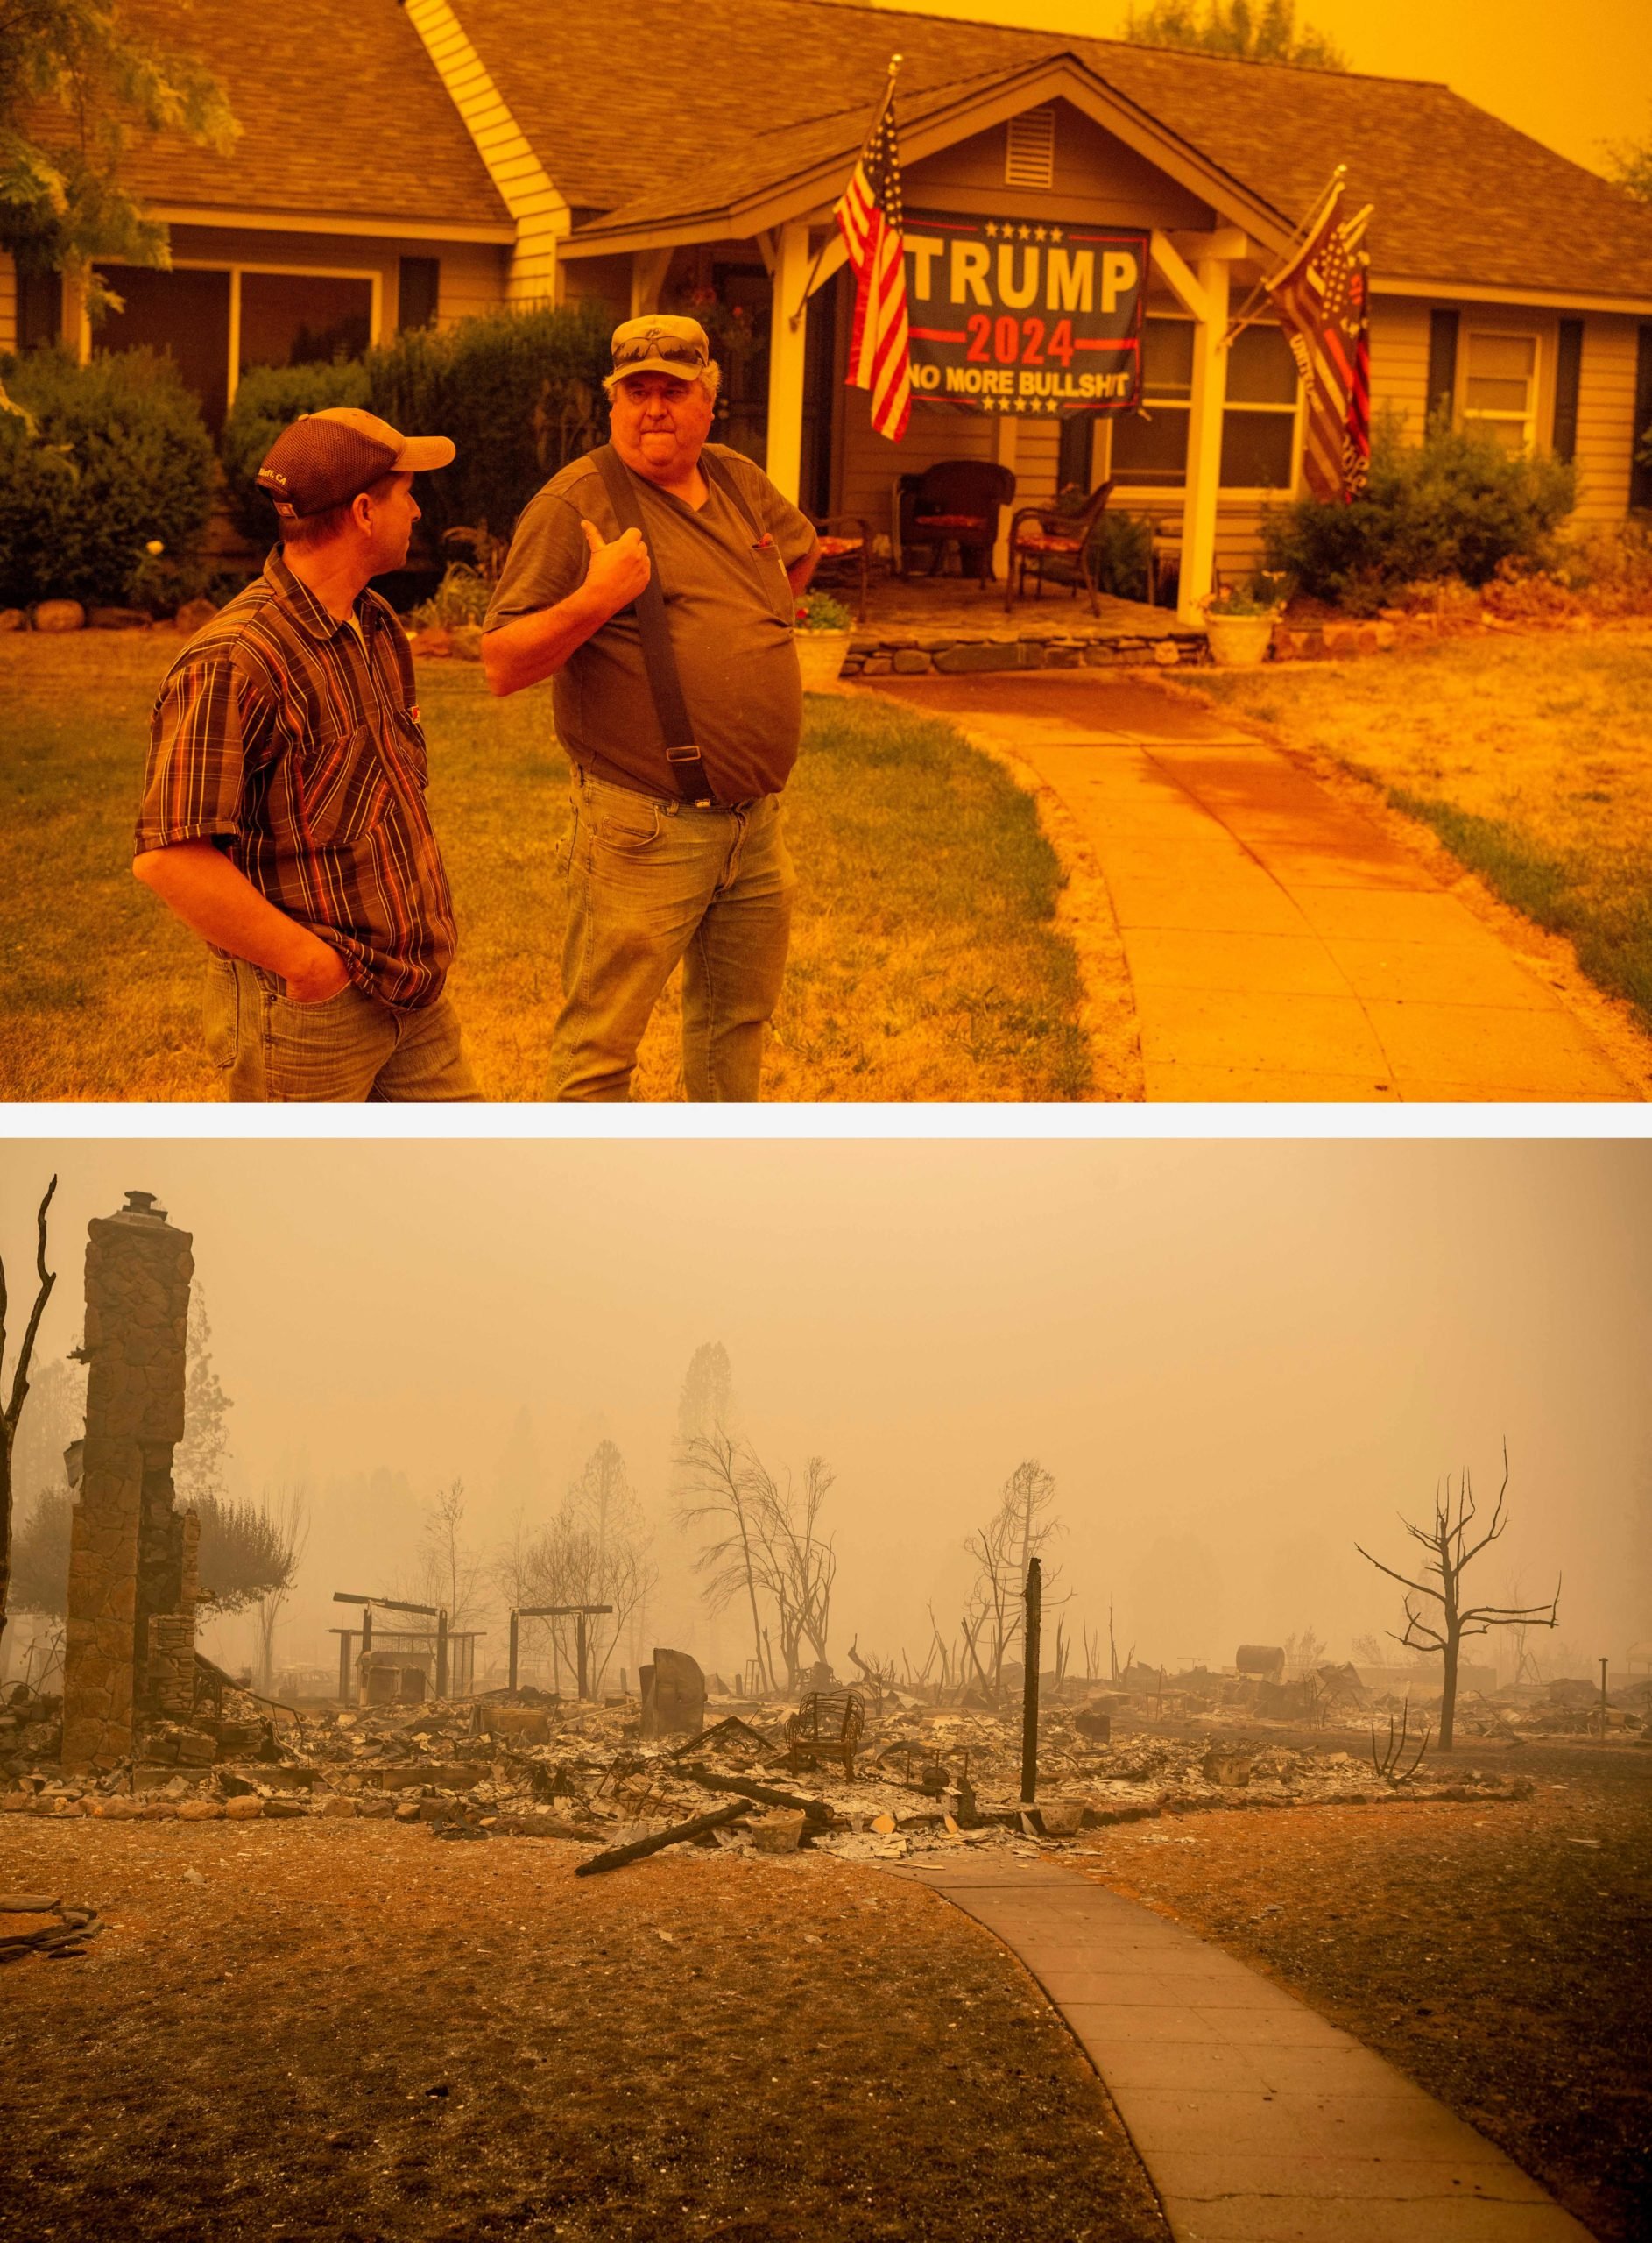 In this photo combination, a before and after series shows homeowner Jerry Whipple (R) speaking to a neighbor about ignoring a mandatory evacuation order in front of his home on July 23, 2021, and after it burned on August 7, 2021 during the Dixie fire in Greenville, California. (Photo by JOSH EDELSON/AFP via Getty Images)